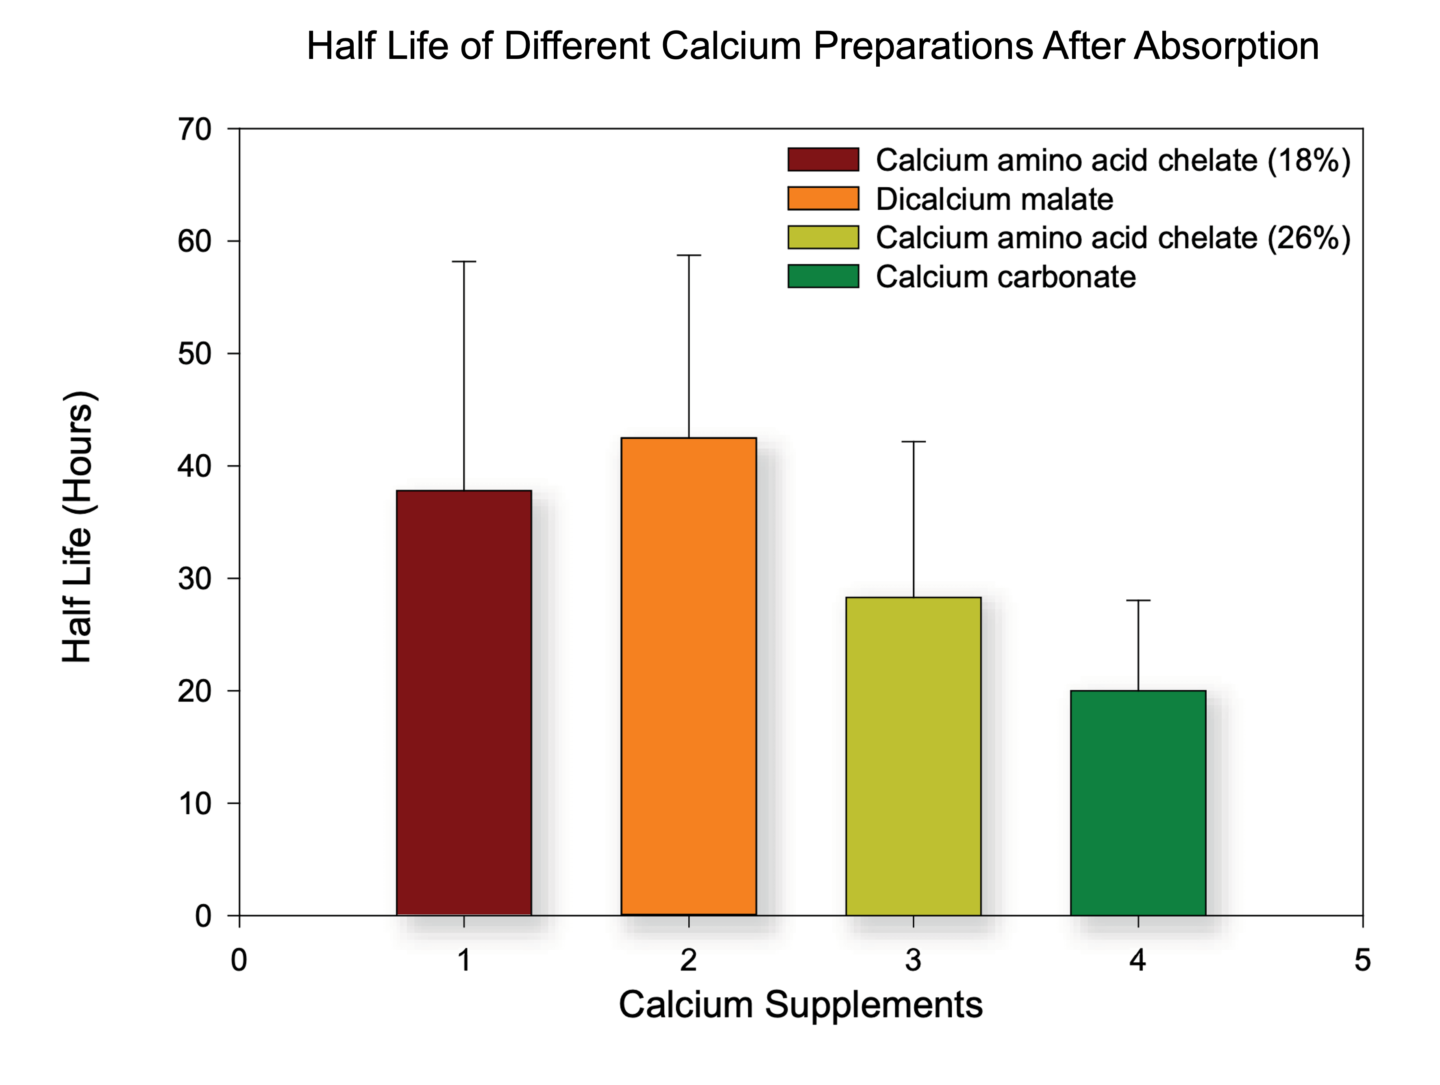 What form of Calcium and Magnesium should I look for in a supplement?